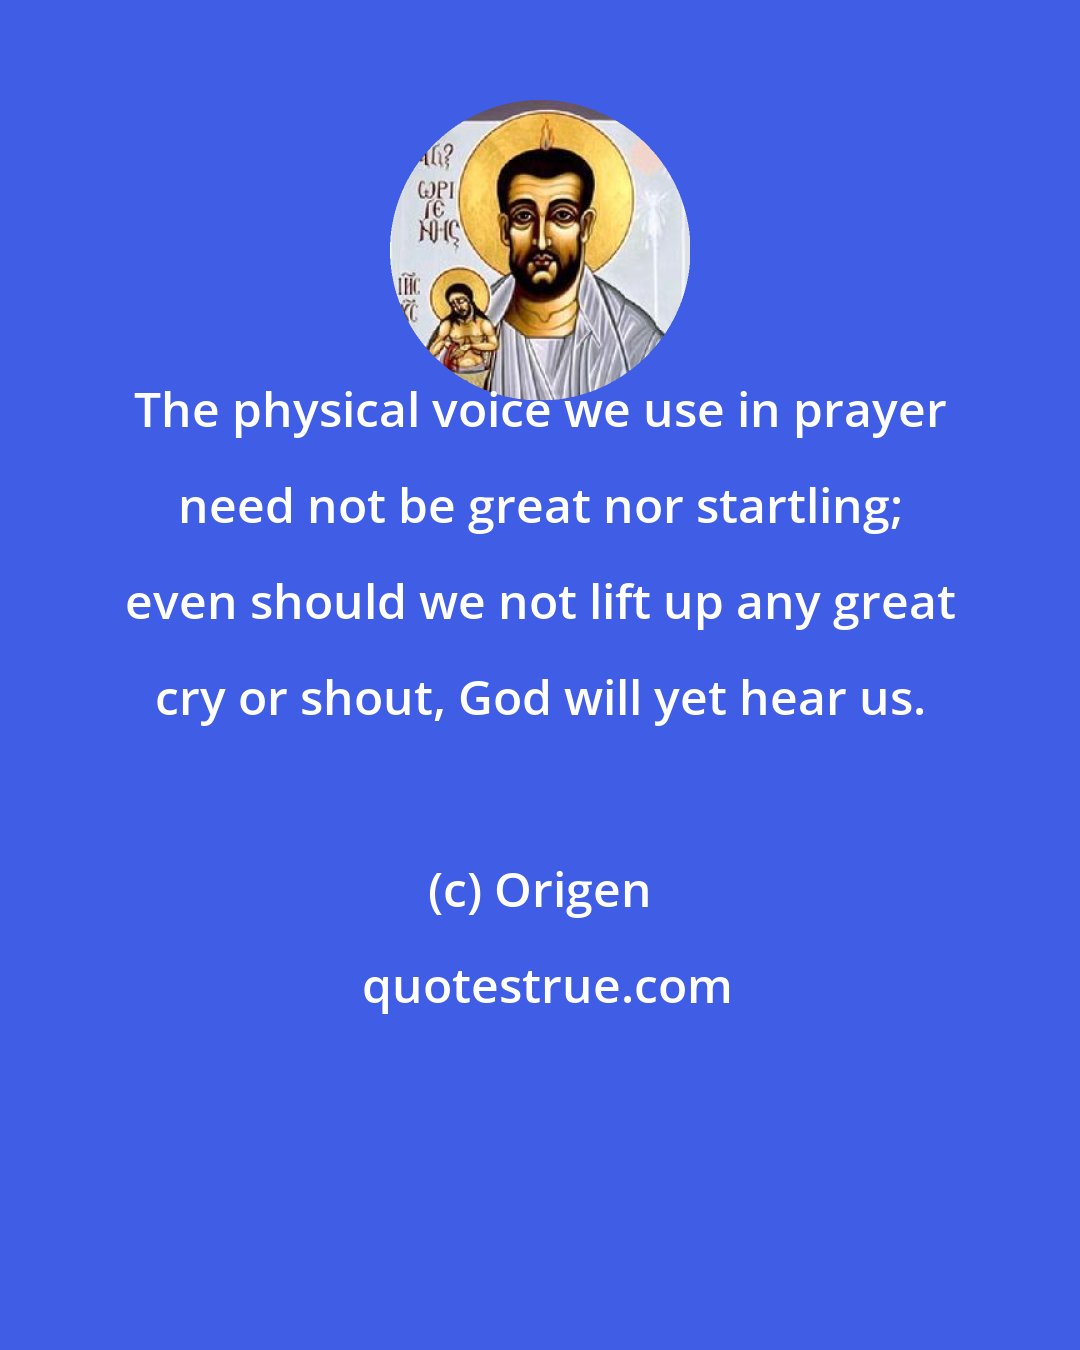 Origen: The physical voice we use in prayer need not be great nor startling; even should we not lift up any great cry or shout, God will yet hear us.